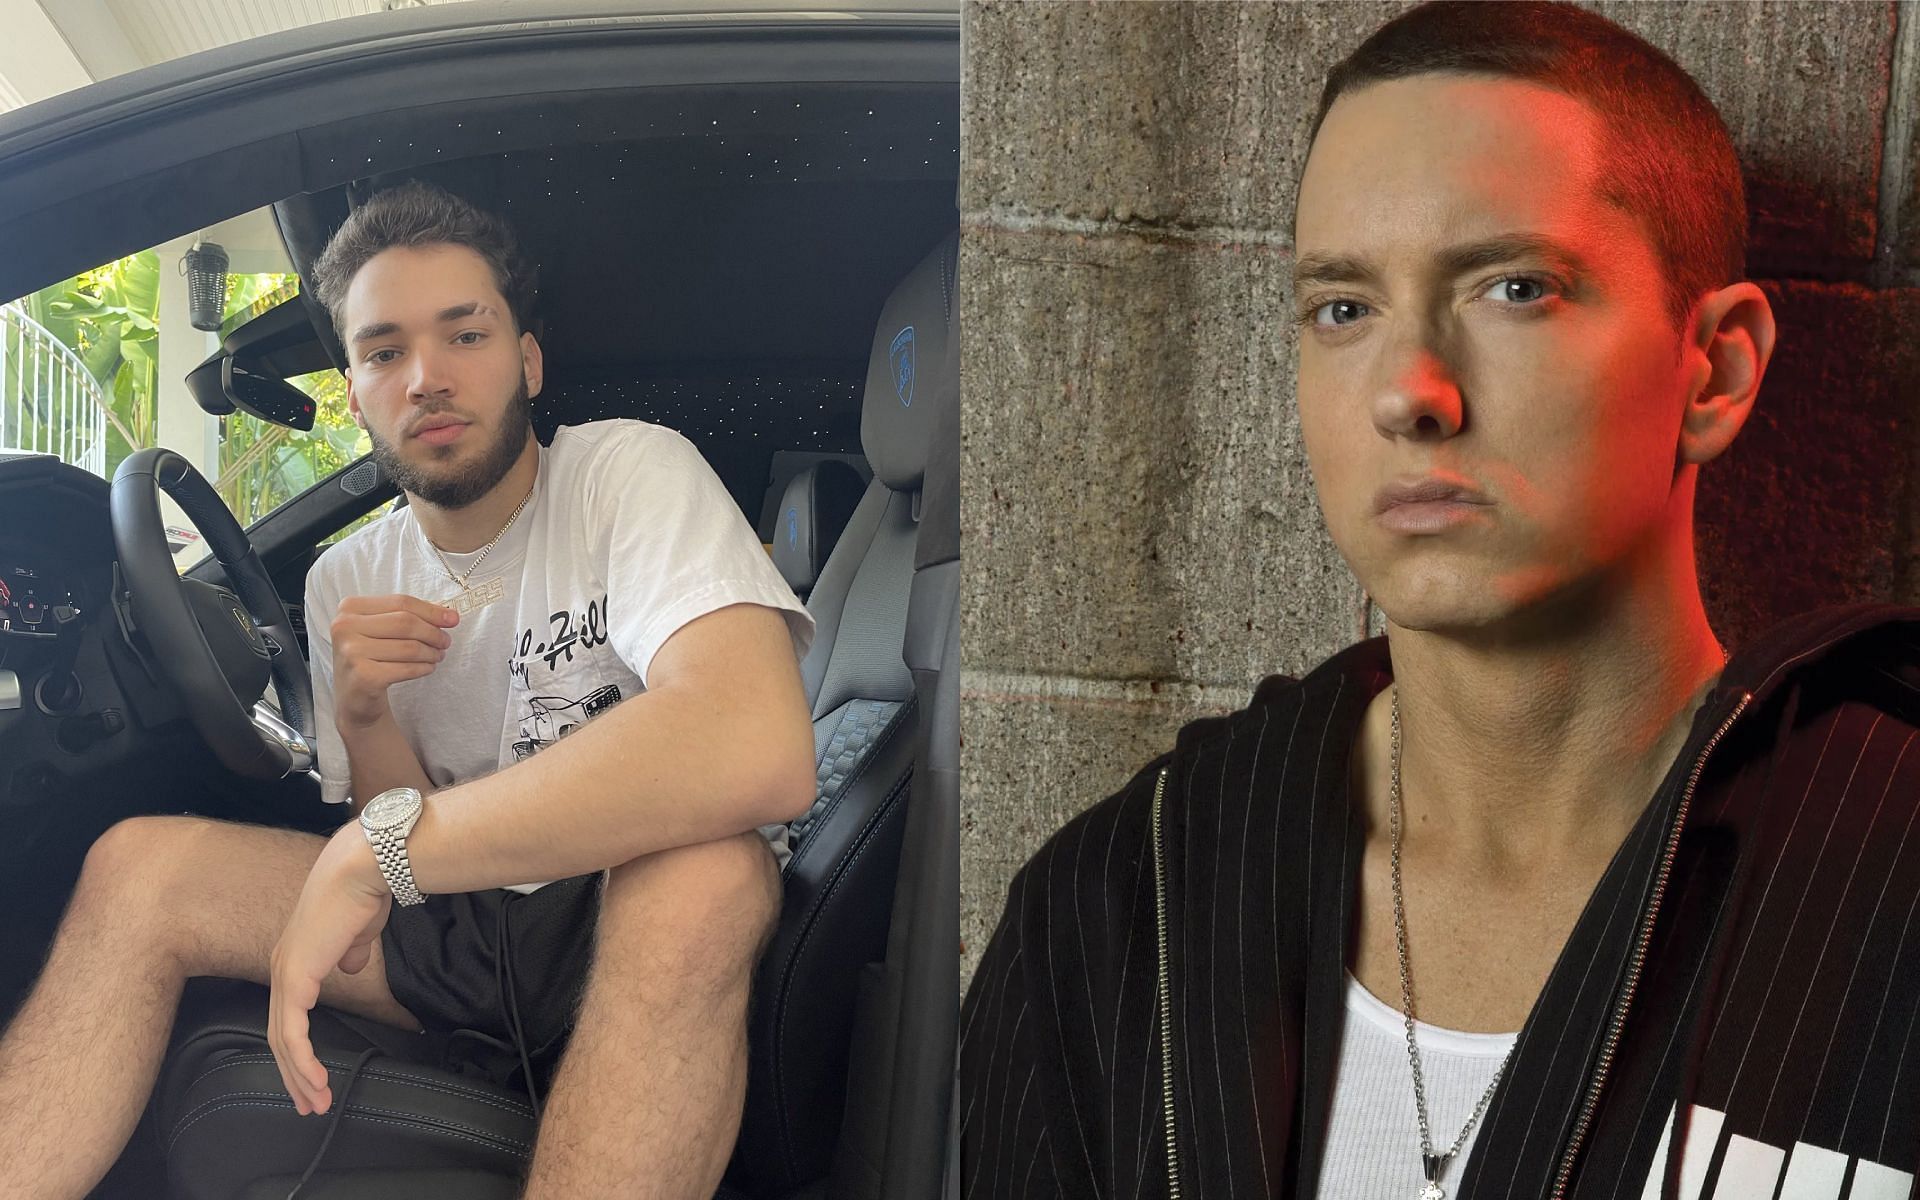 Adin Ross wants to collaborate with Eminem (Image via Adin Ross/X and www.britannica.com/biography/Eminem)